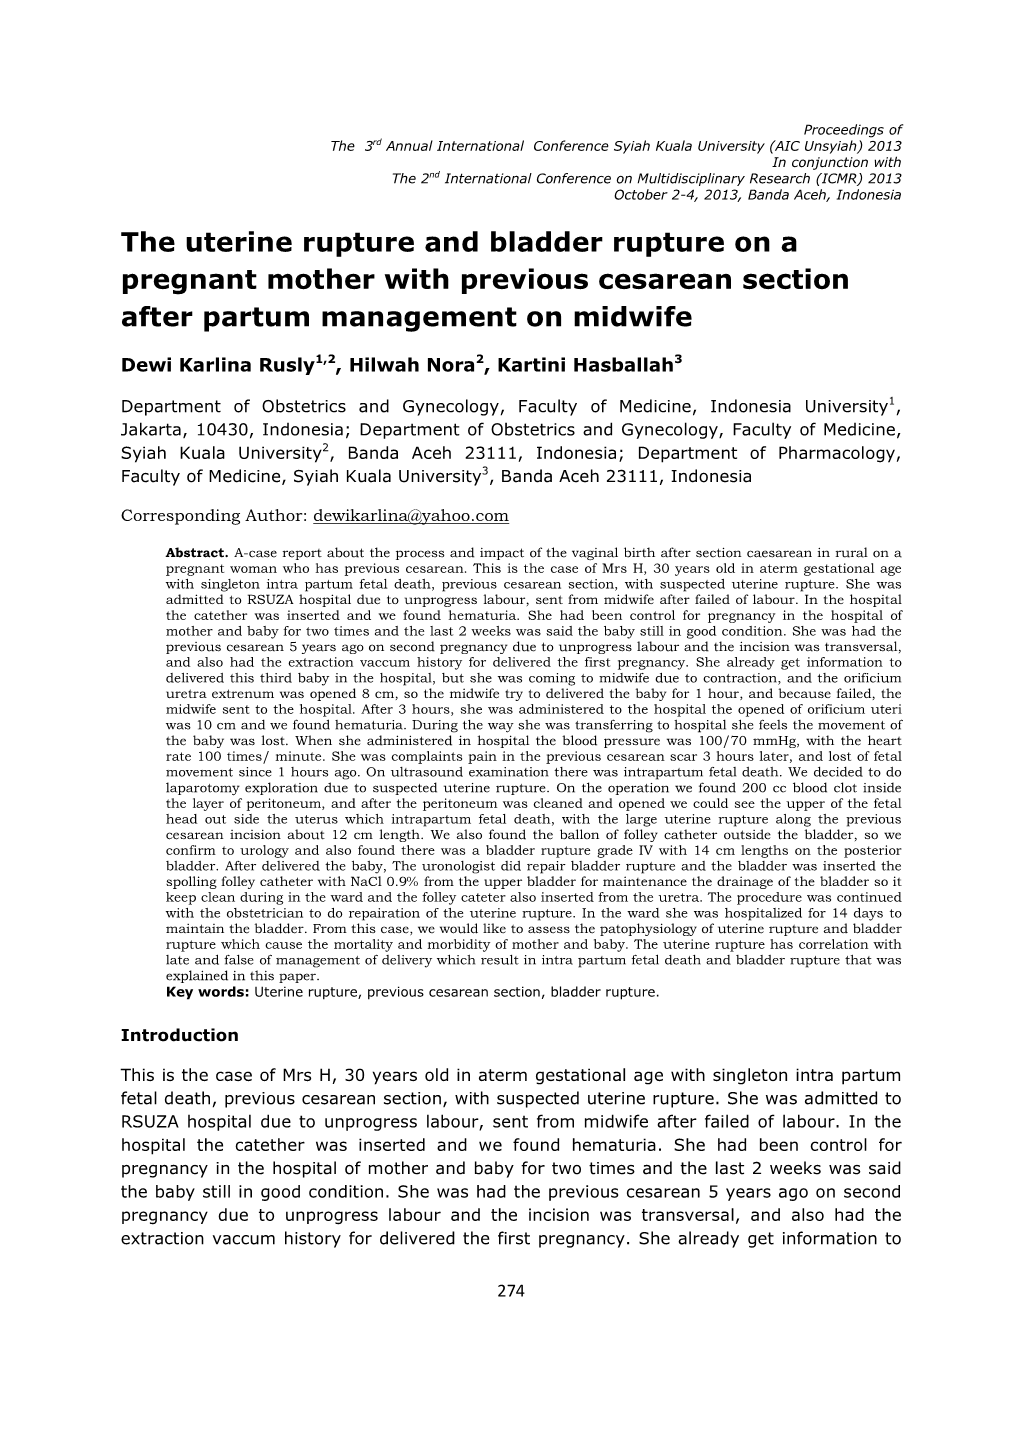 The Uterine Rupture and Bladder Rupture on a Pregnant Mother with Previous Cesarean Section After Partum Management on Midwife